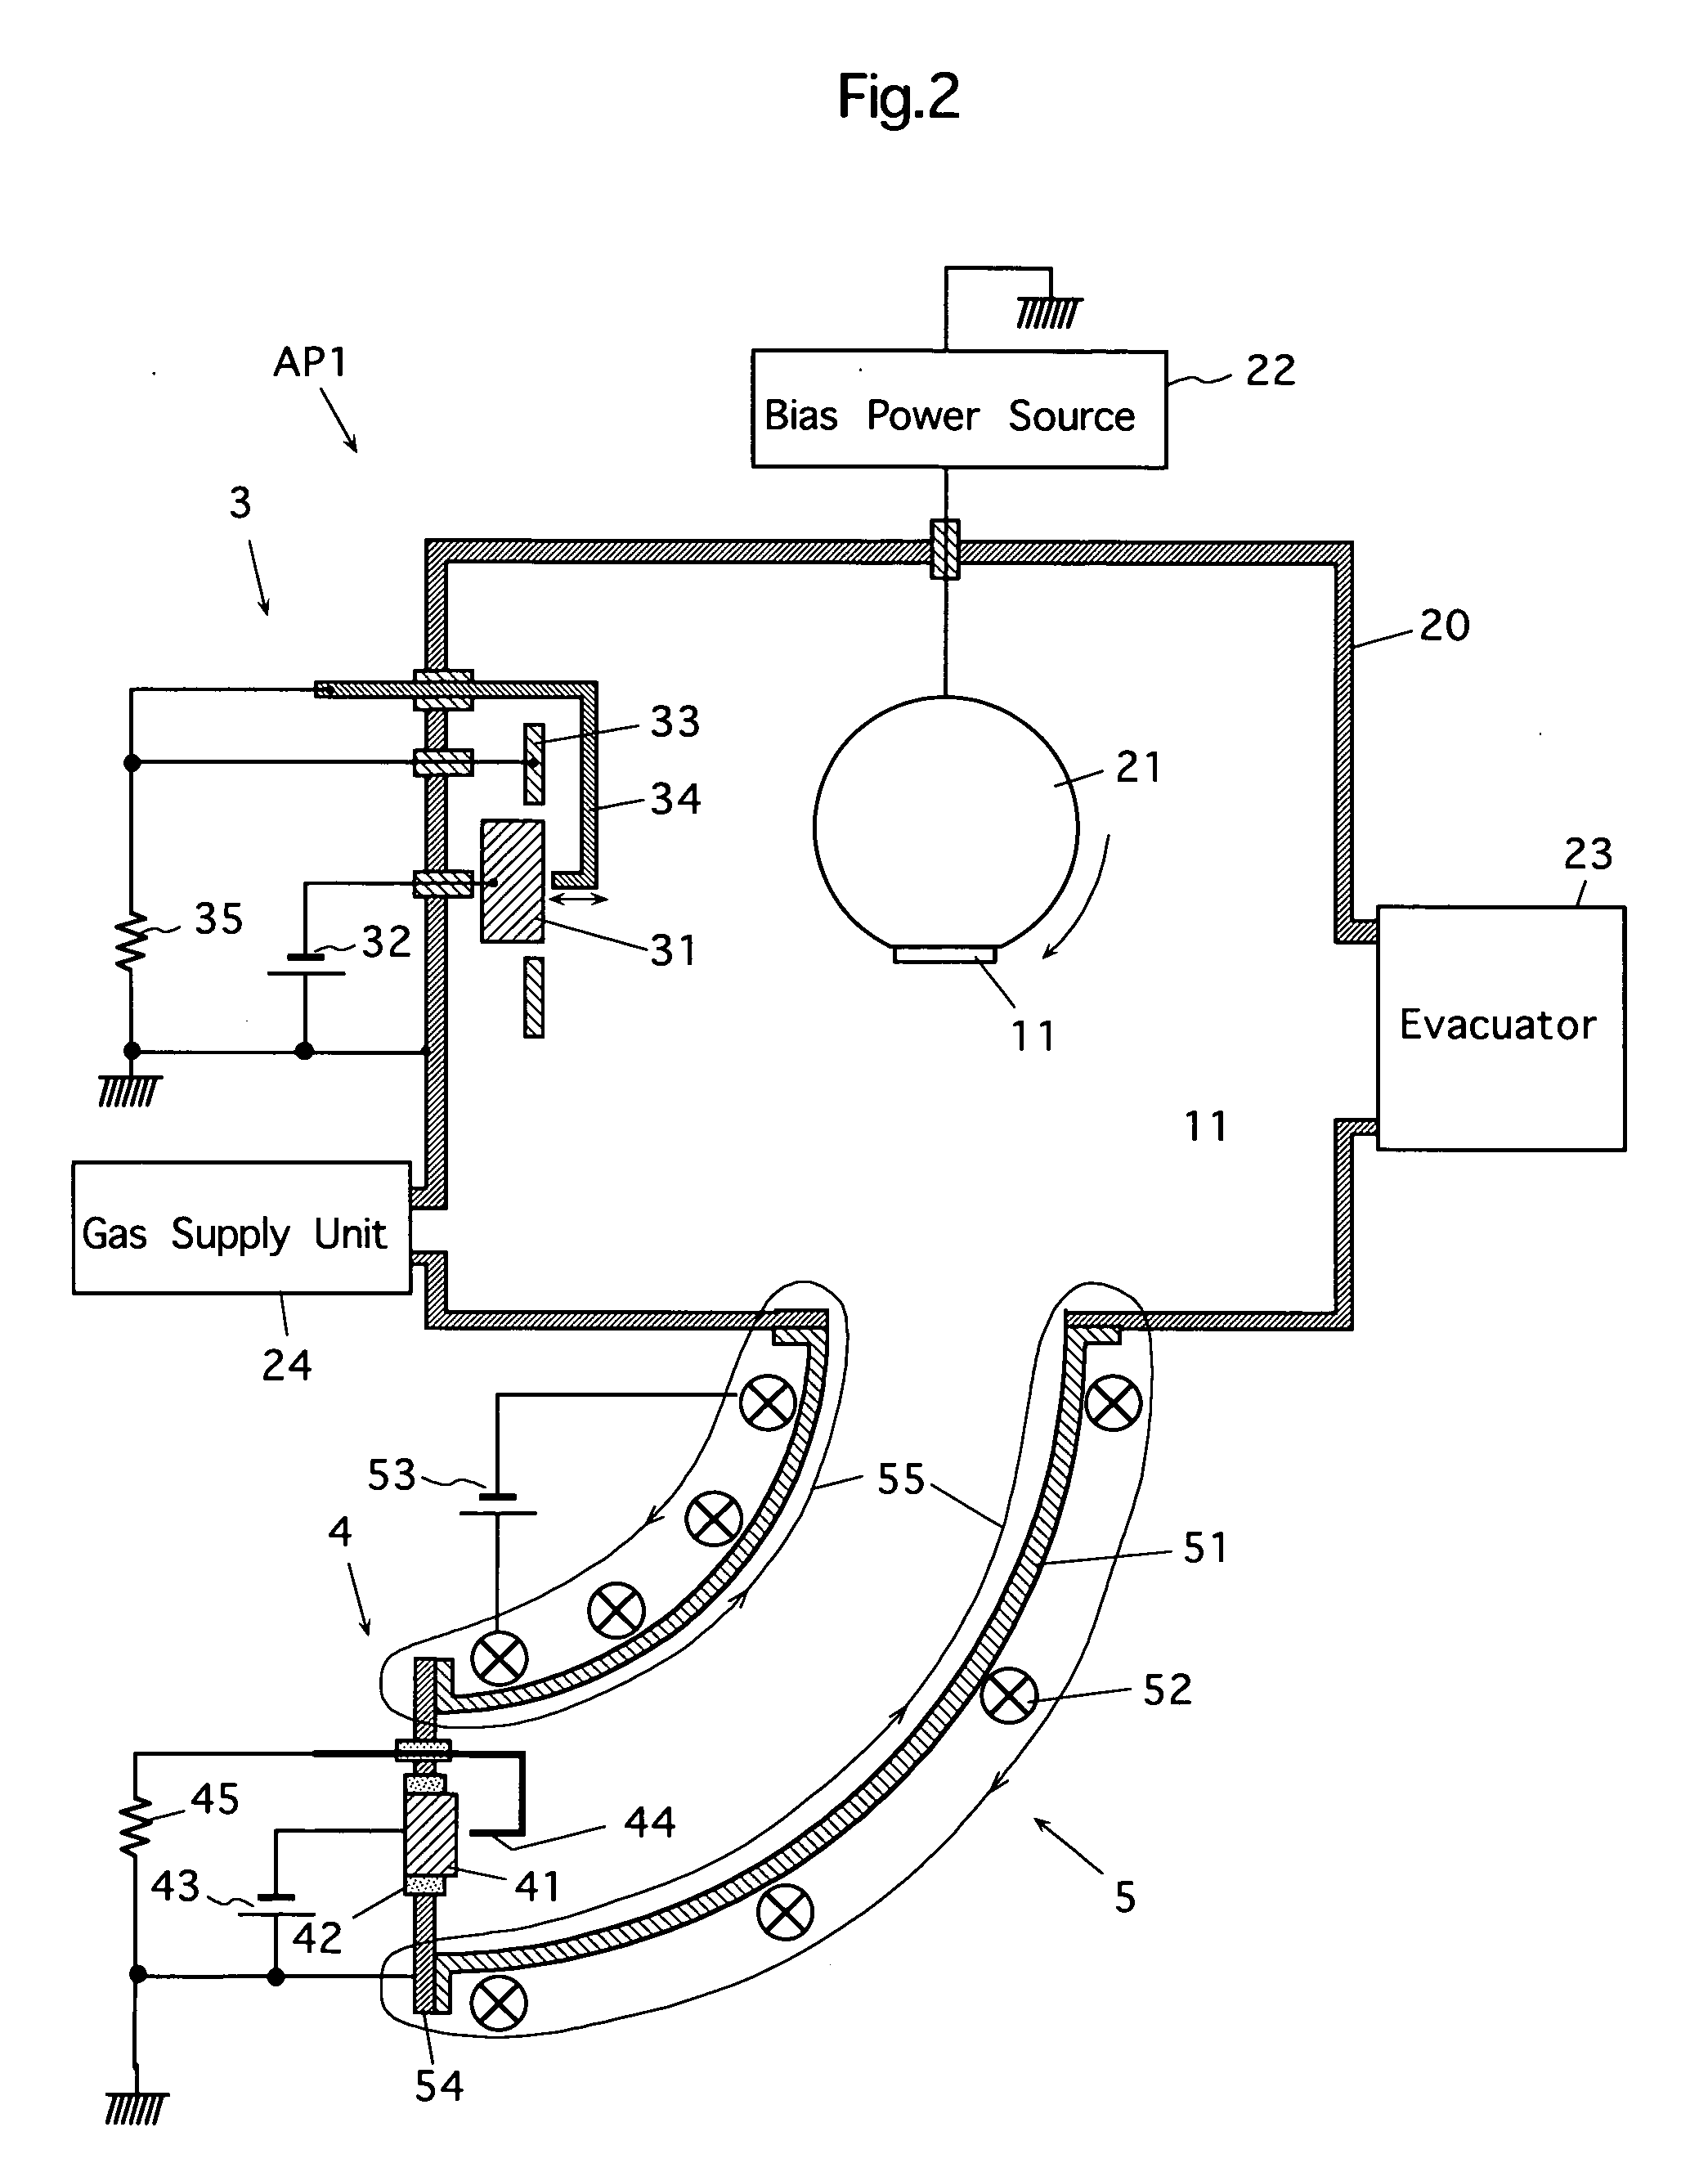 Carbon film-coated article and method of producing the same